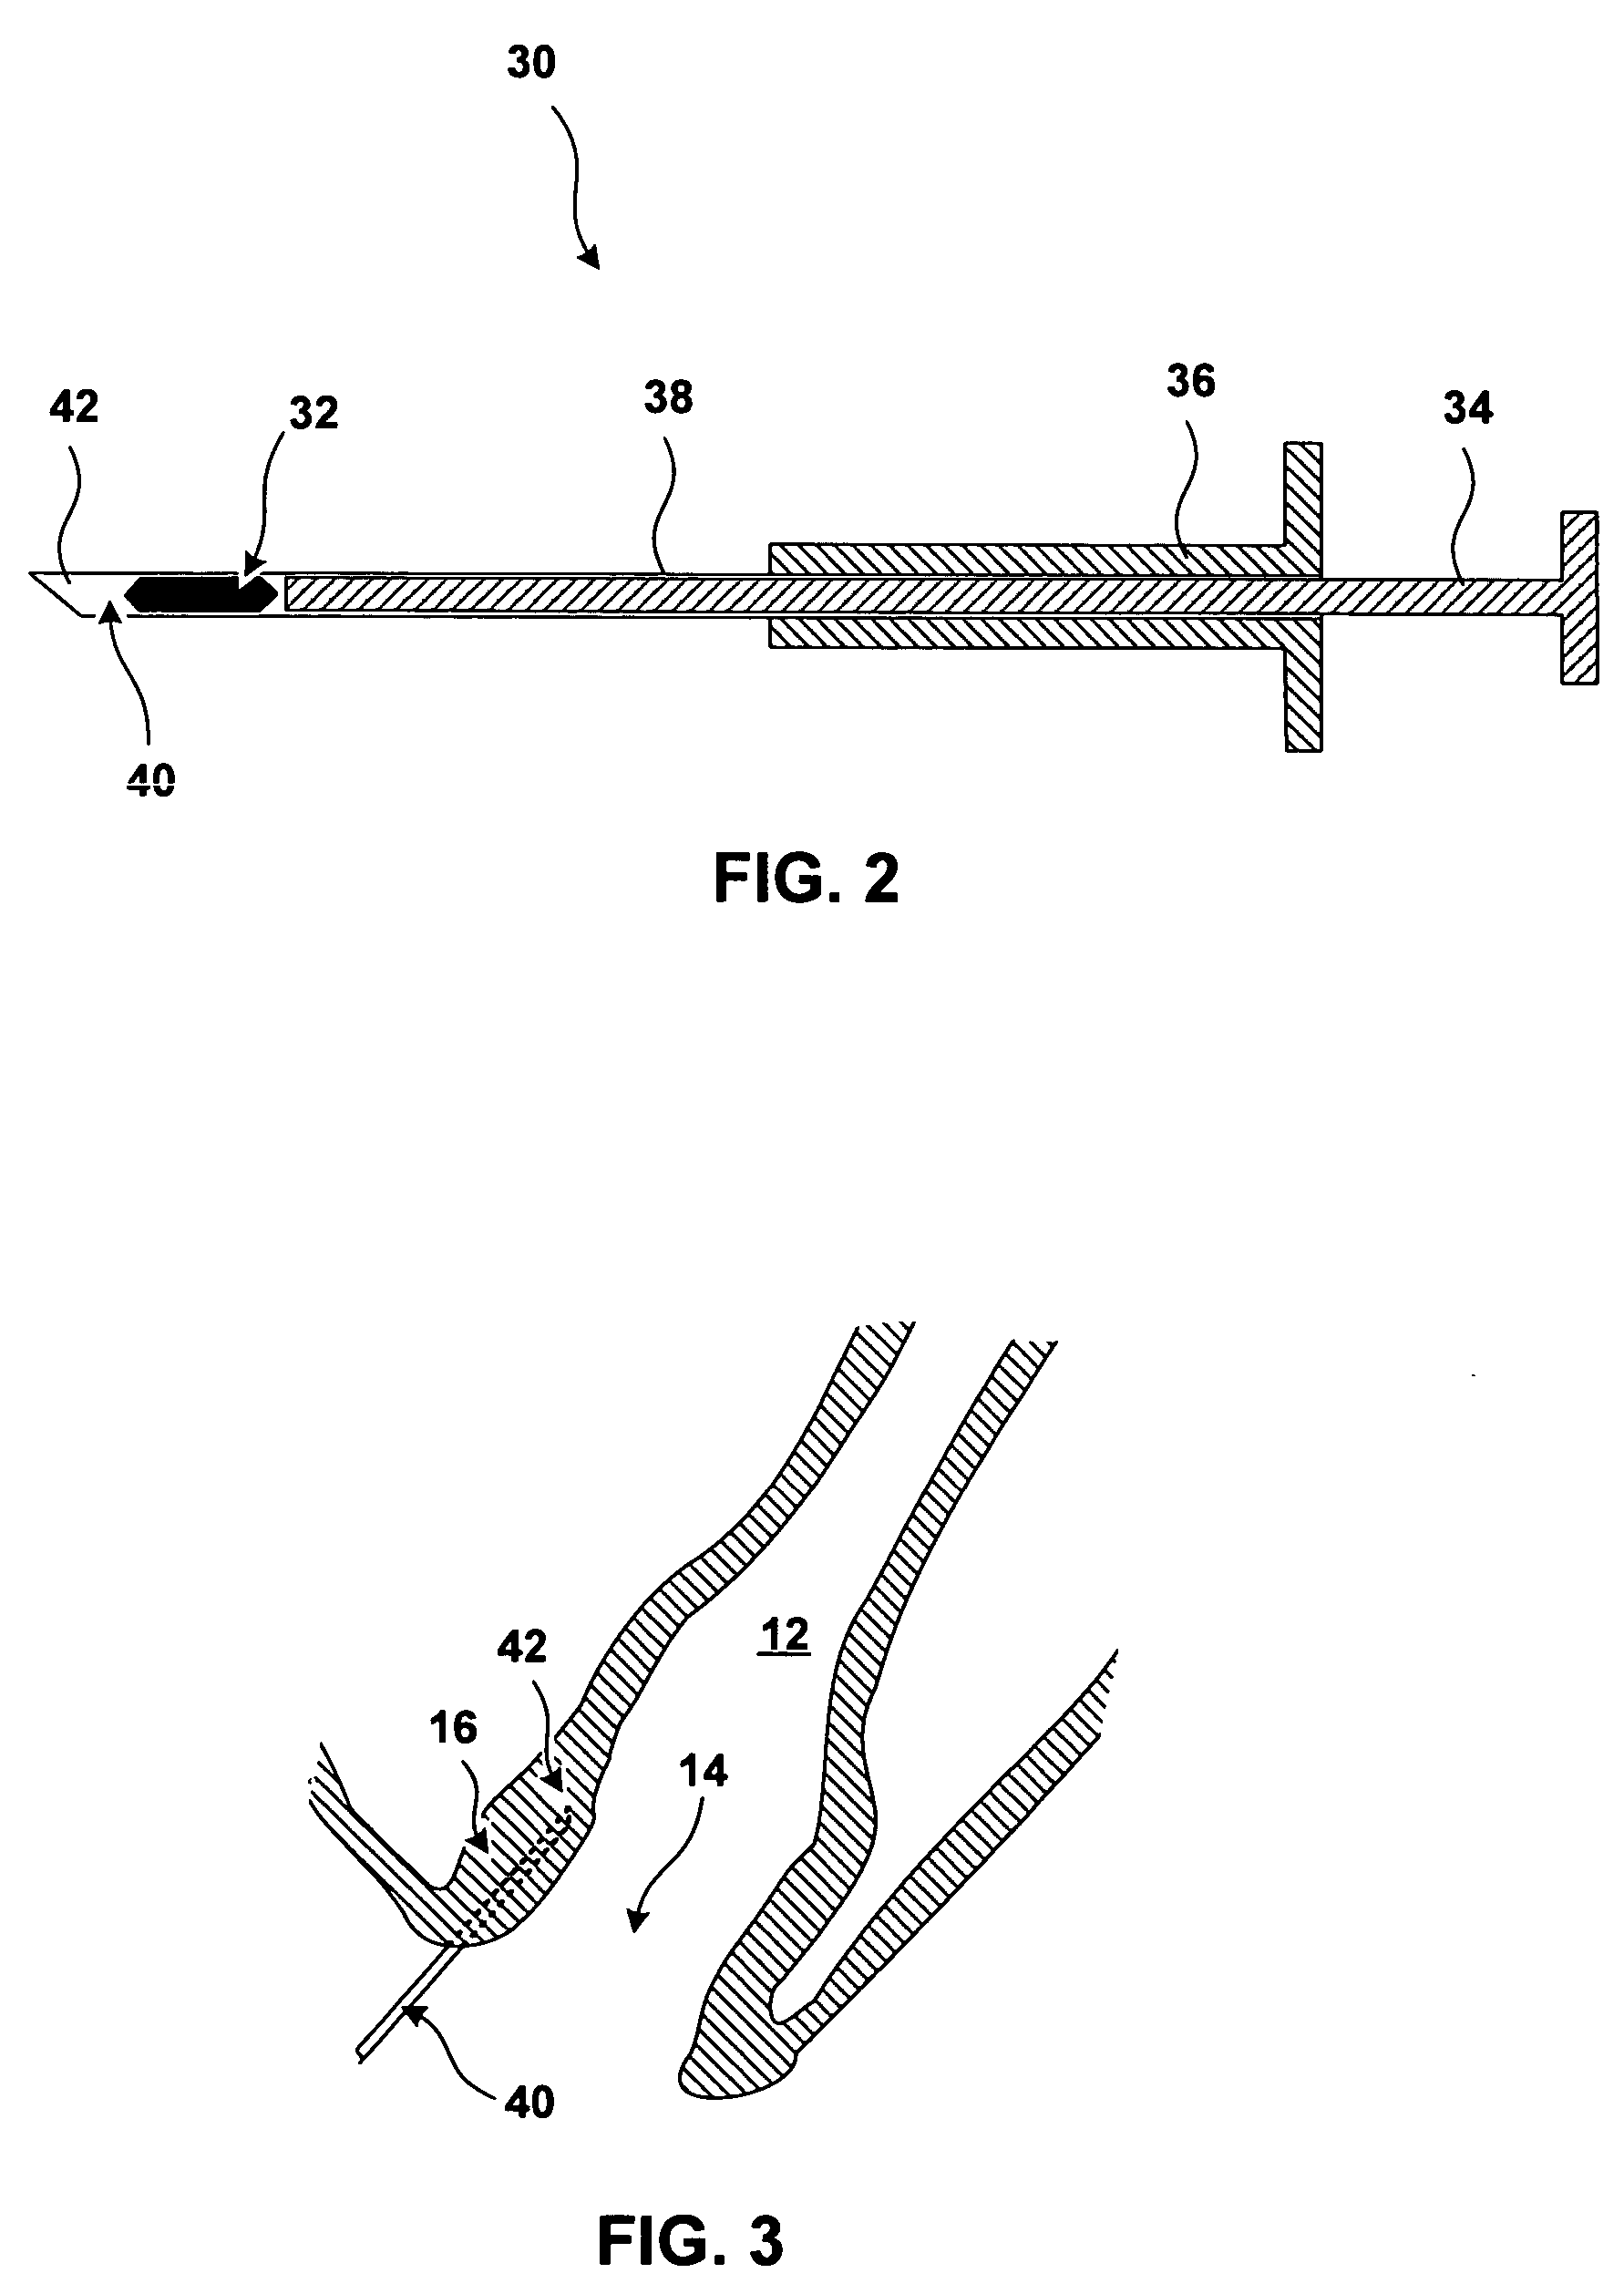 Implantable devices and methods for treating fecal incontinence